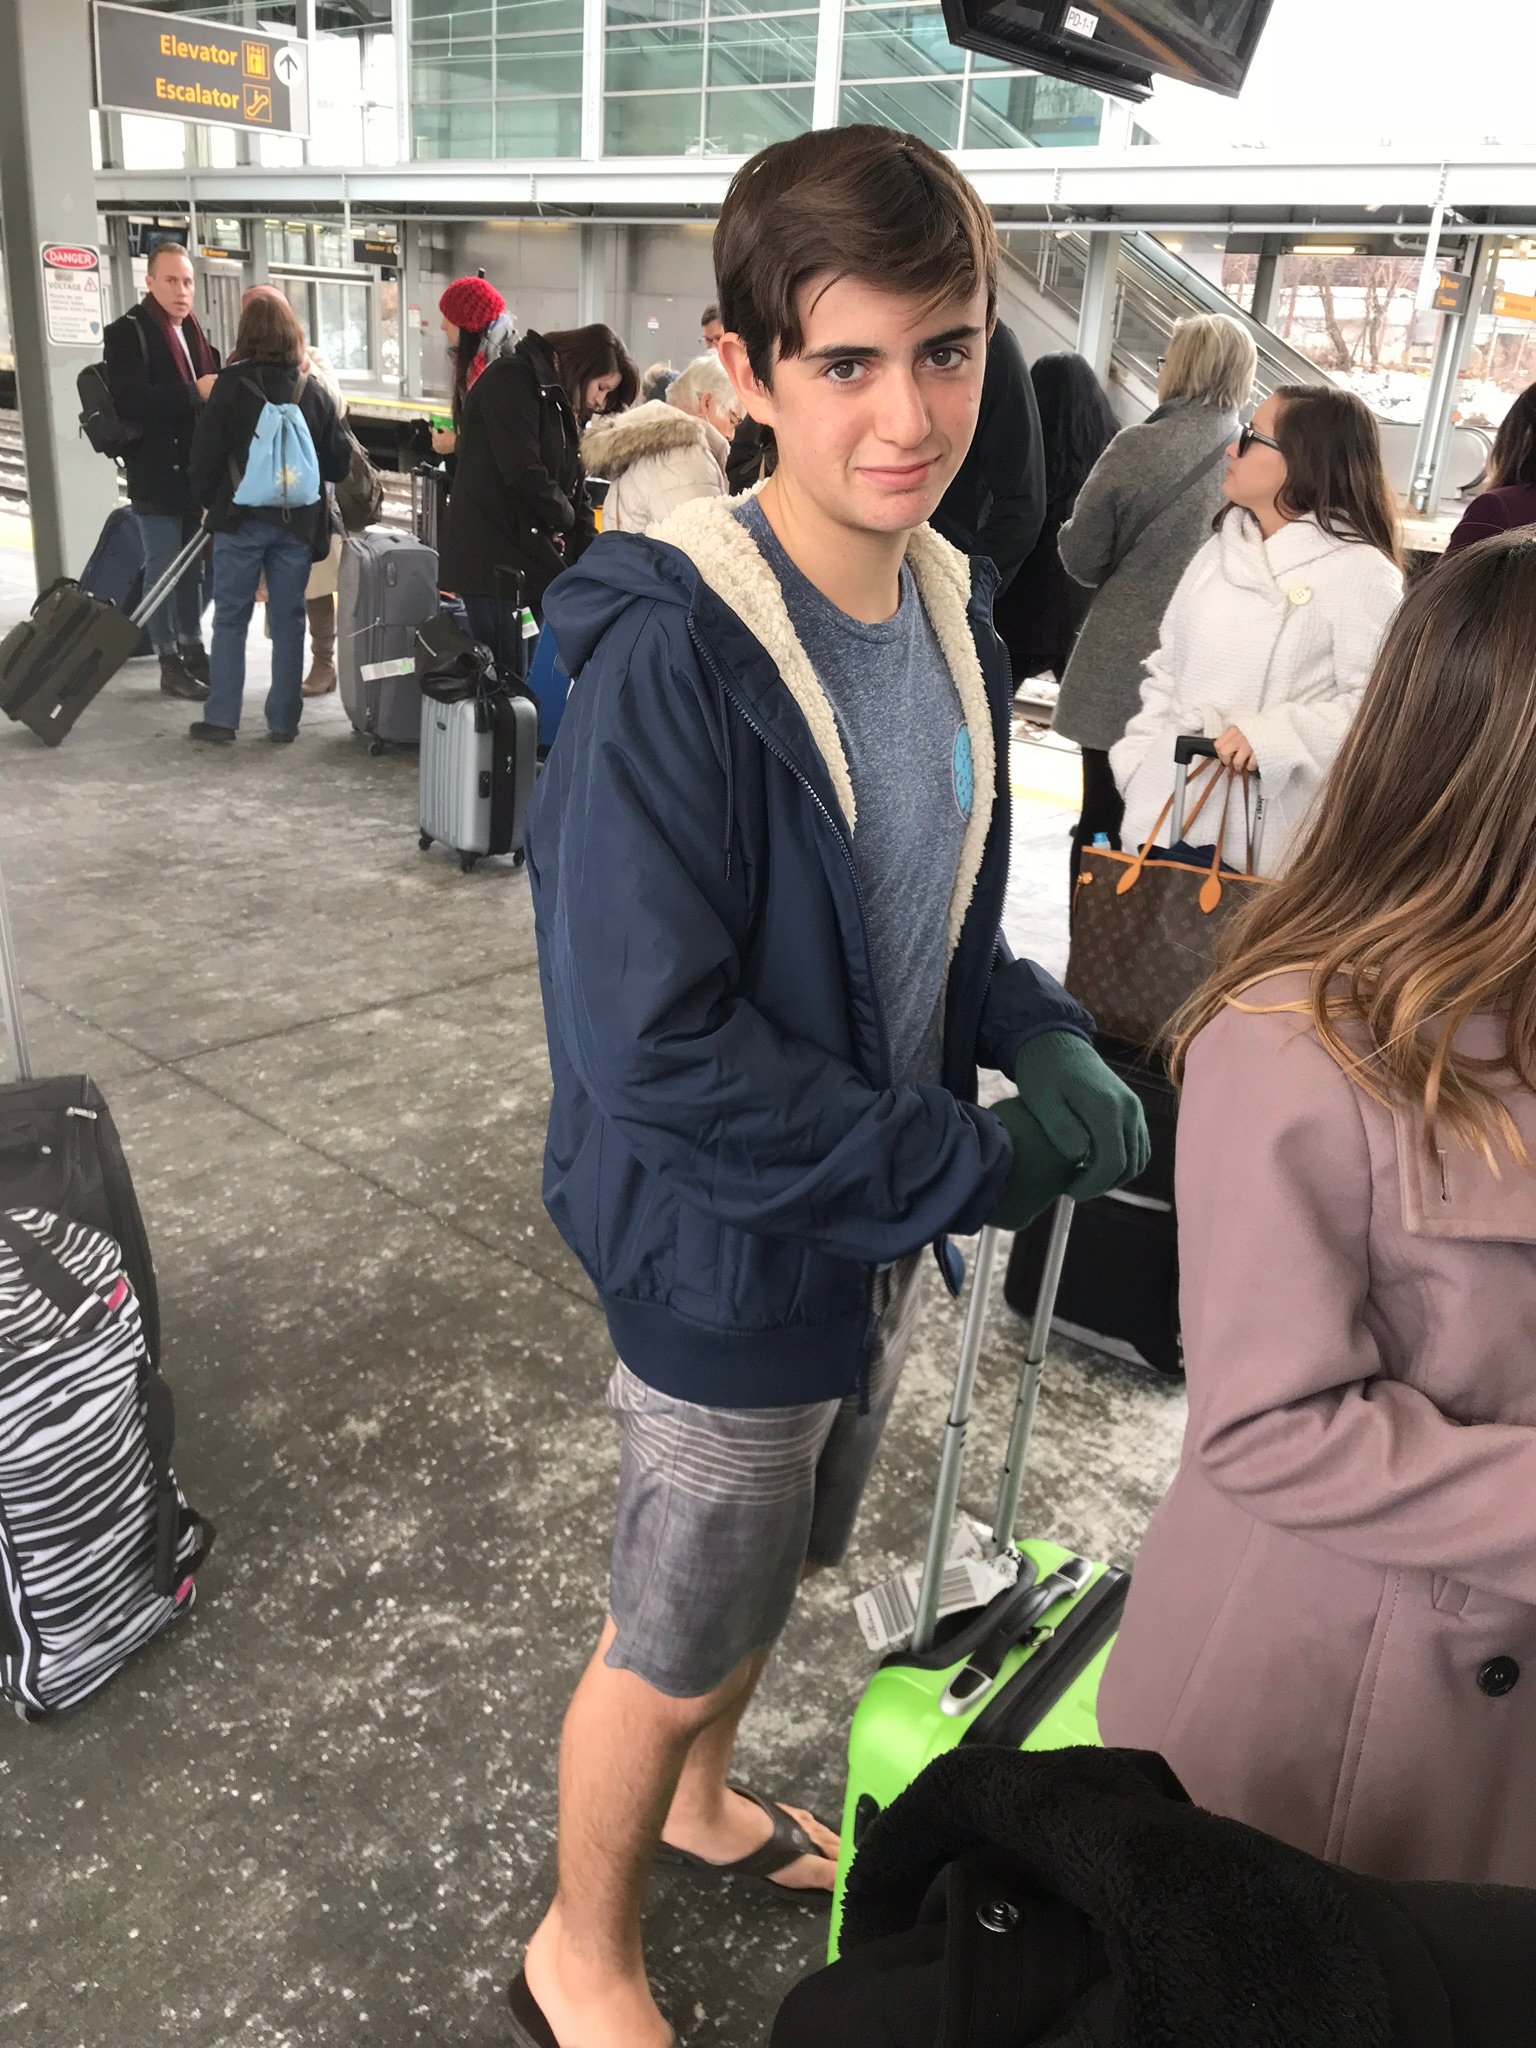 boy wearing shorts and flip flops, gloves and jacket in cold weather at a train station